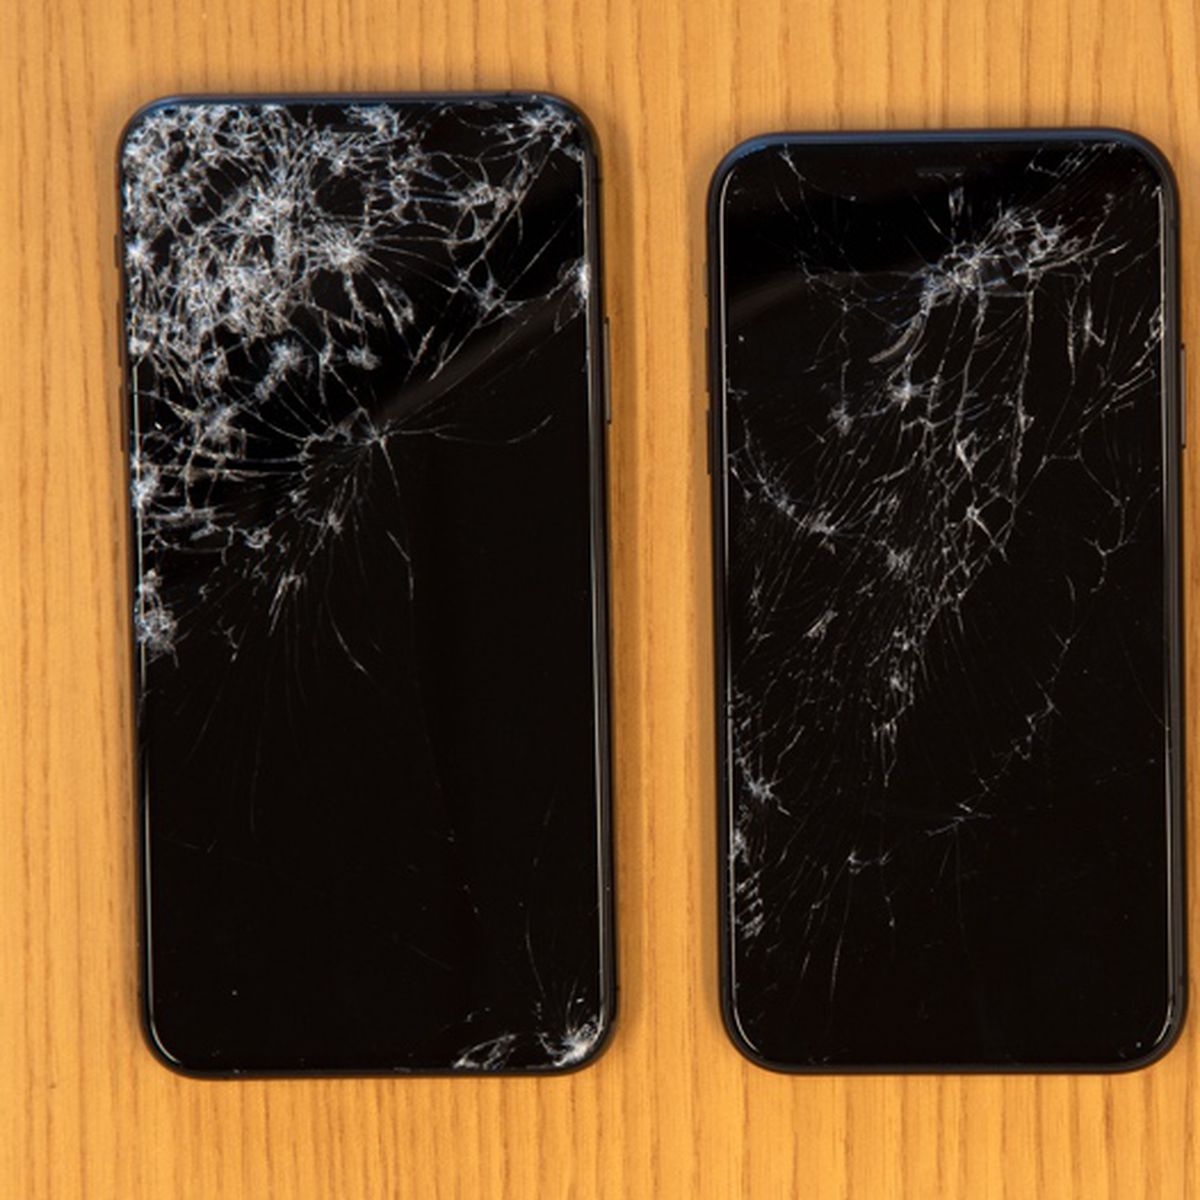 Drop tests show iPhone 13 is just as durable as iPhone 12